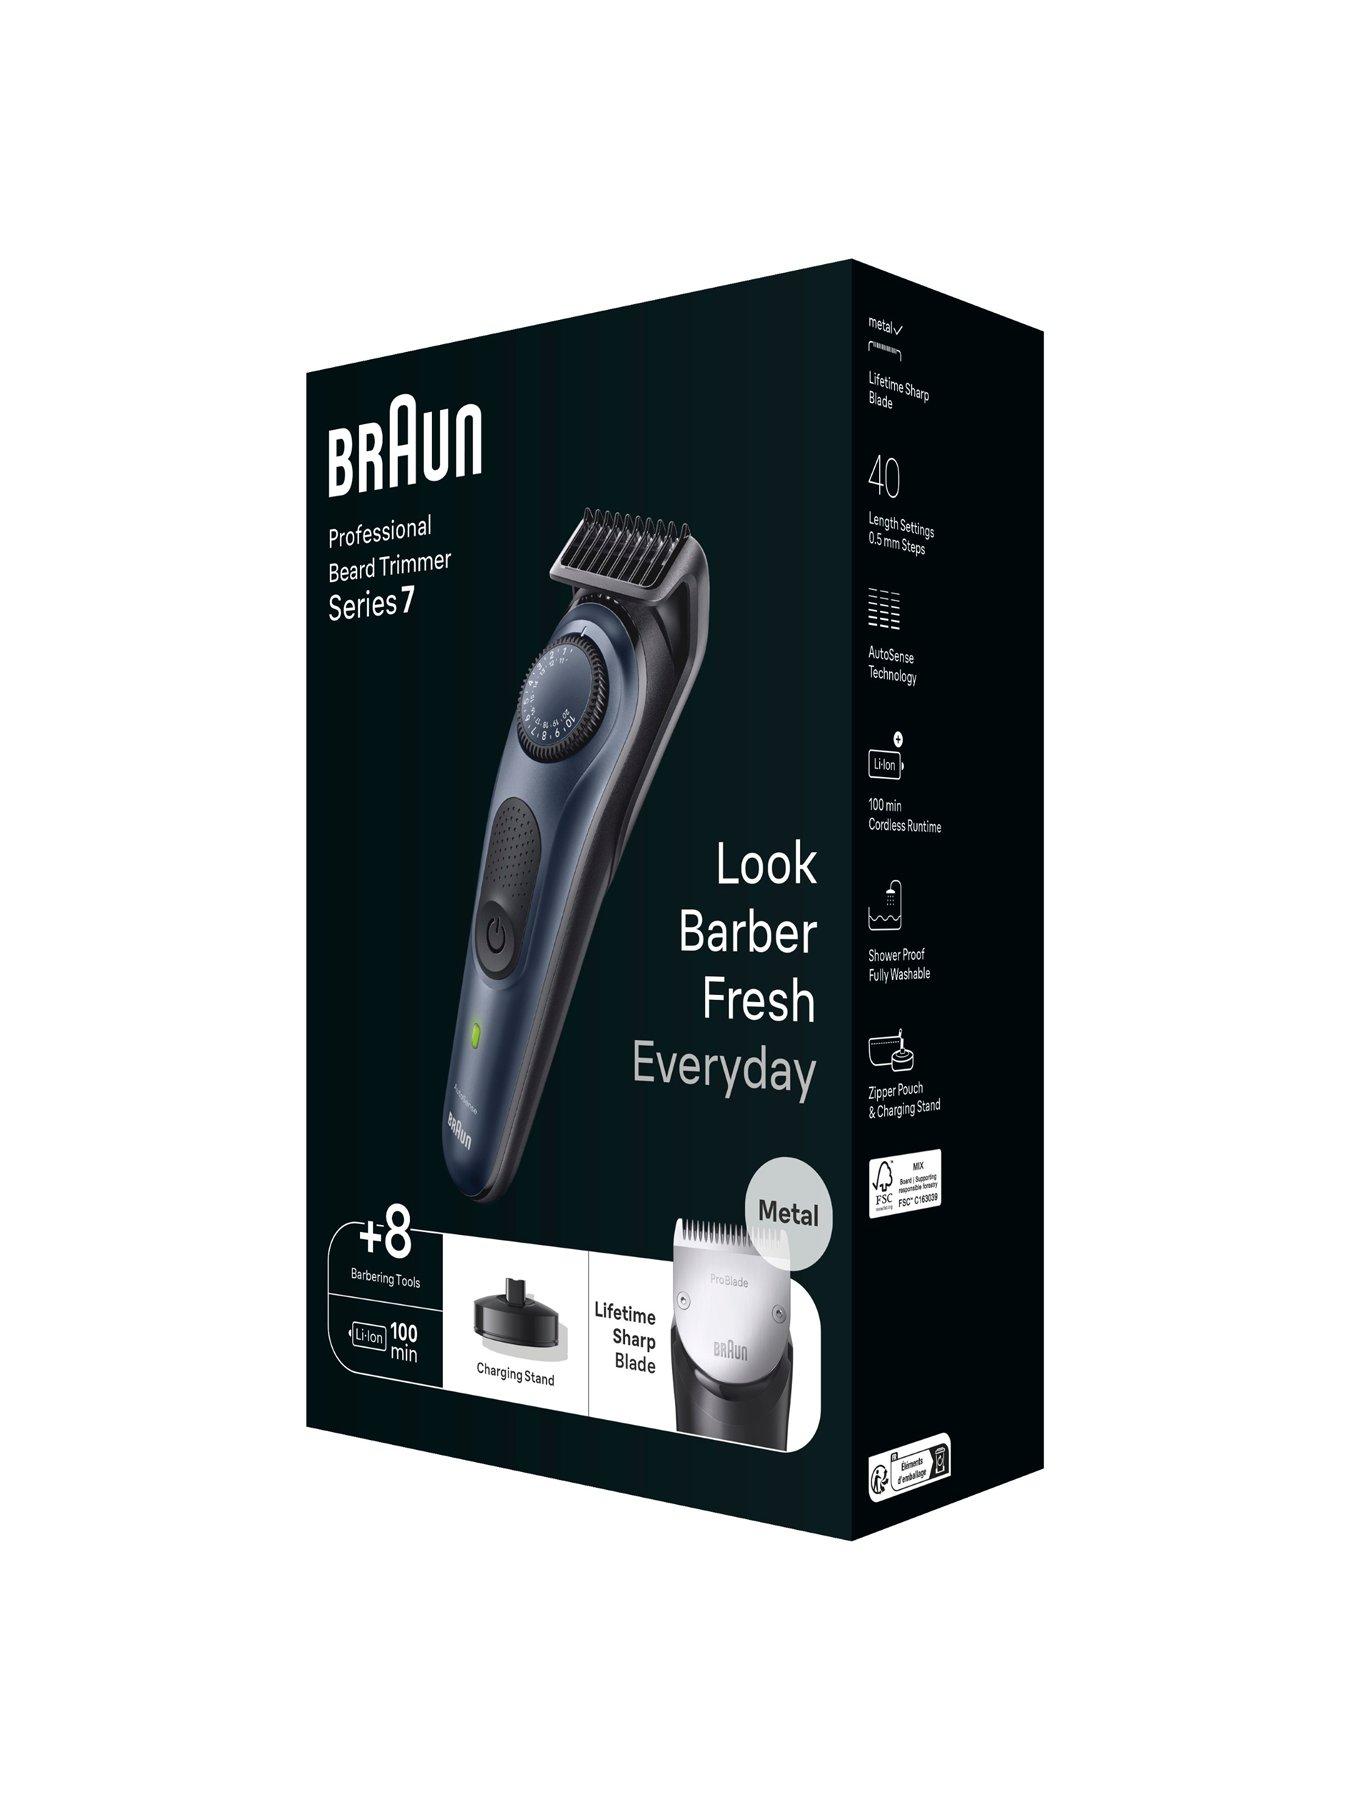 Braun Series 9 BT 9420 Beard Trimmer With 11 Barbering Tools